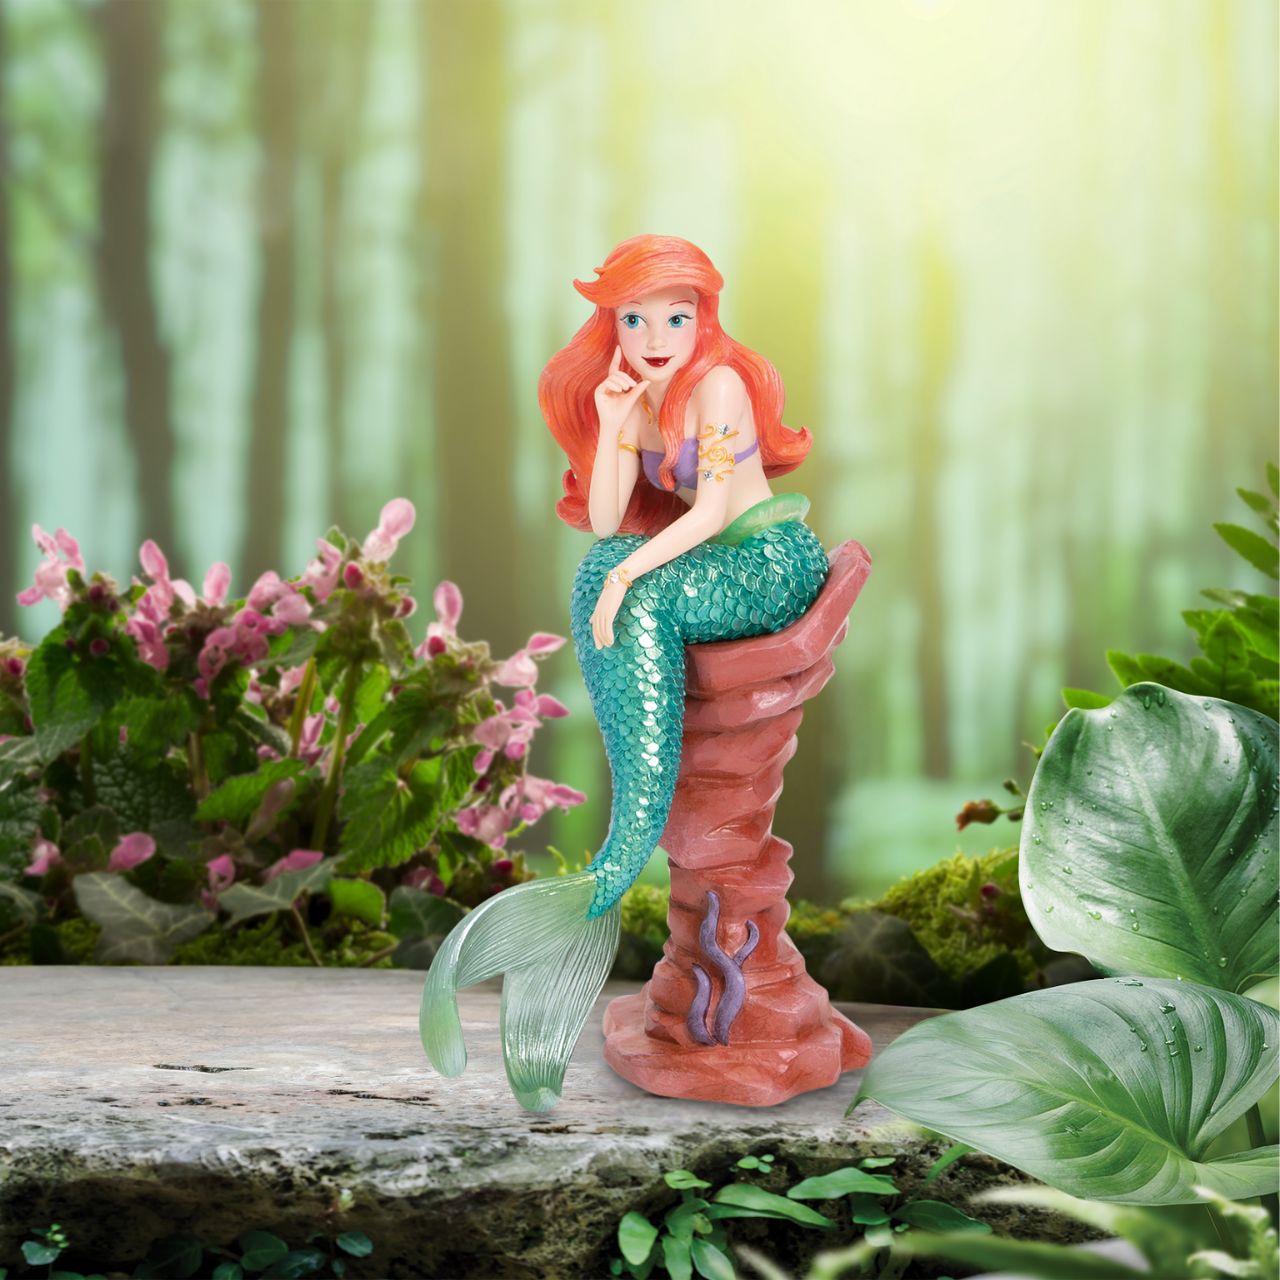 Disney Showcase celebrates the confidence, glamour, and inspiring stories of your favourite Disney Princess in a unique and empowering collection that reminds us all, dreams really do come true. The Little Mermaid figurine is made from cast stone.